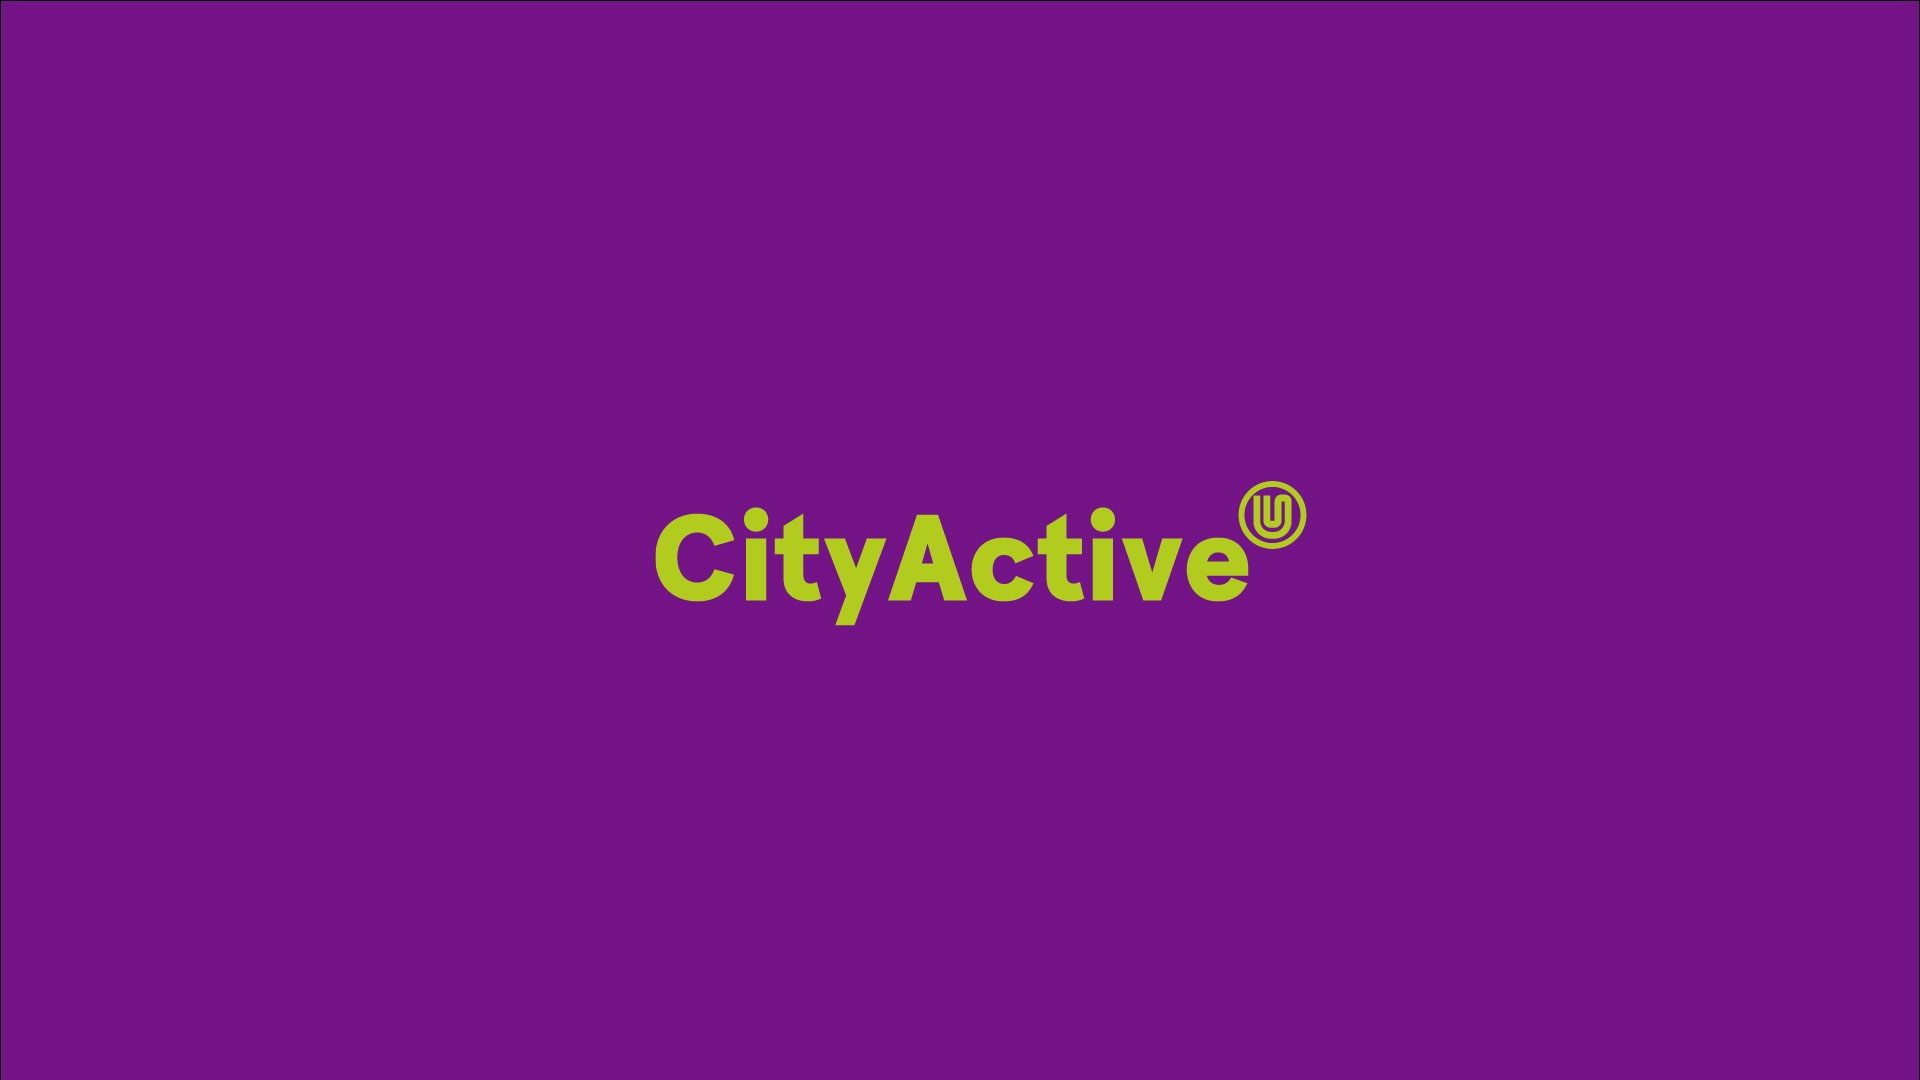 There's no competition in CityActive, just fun.